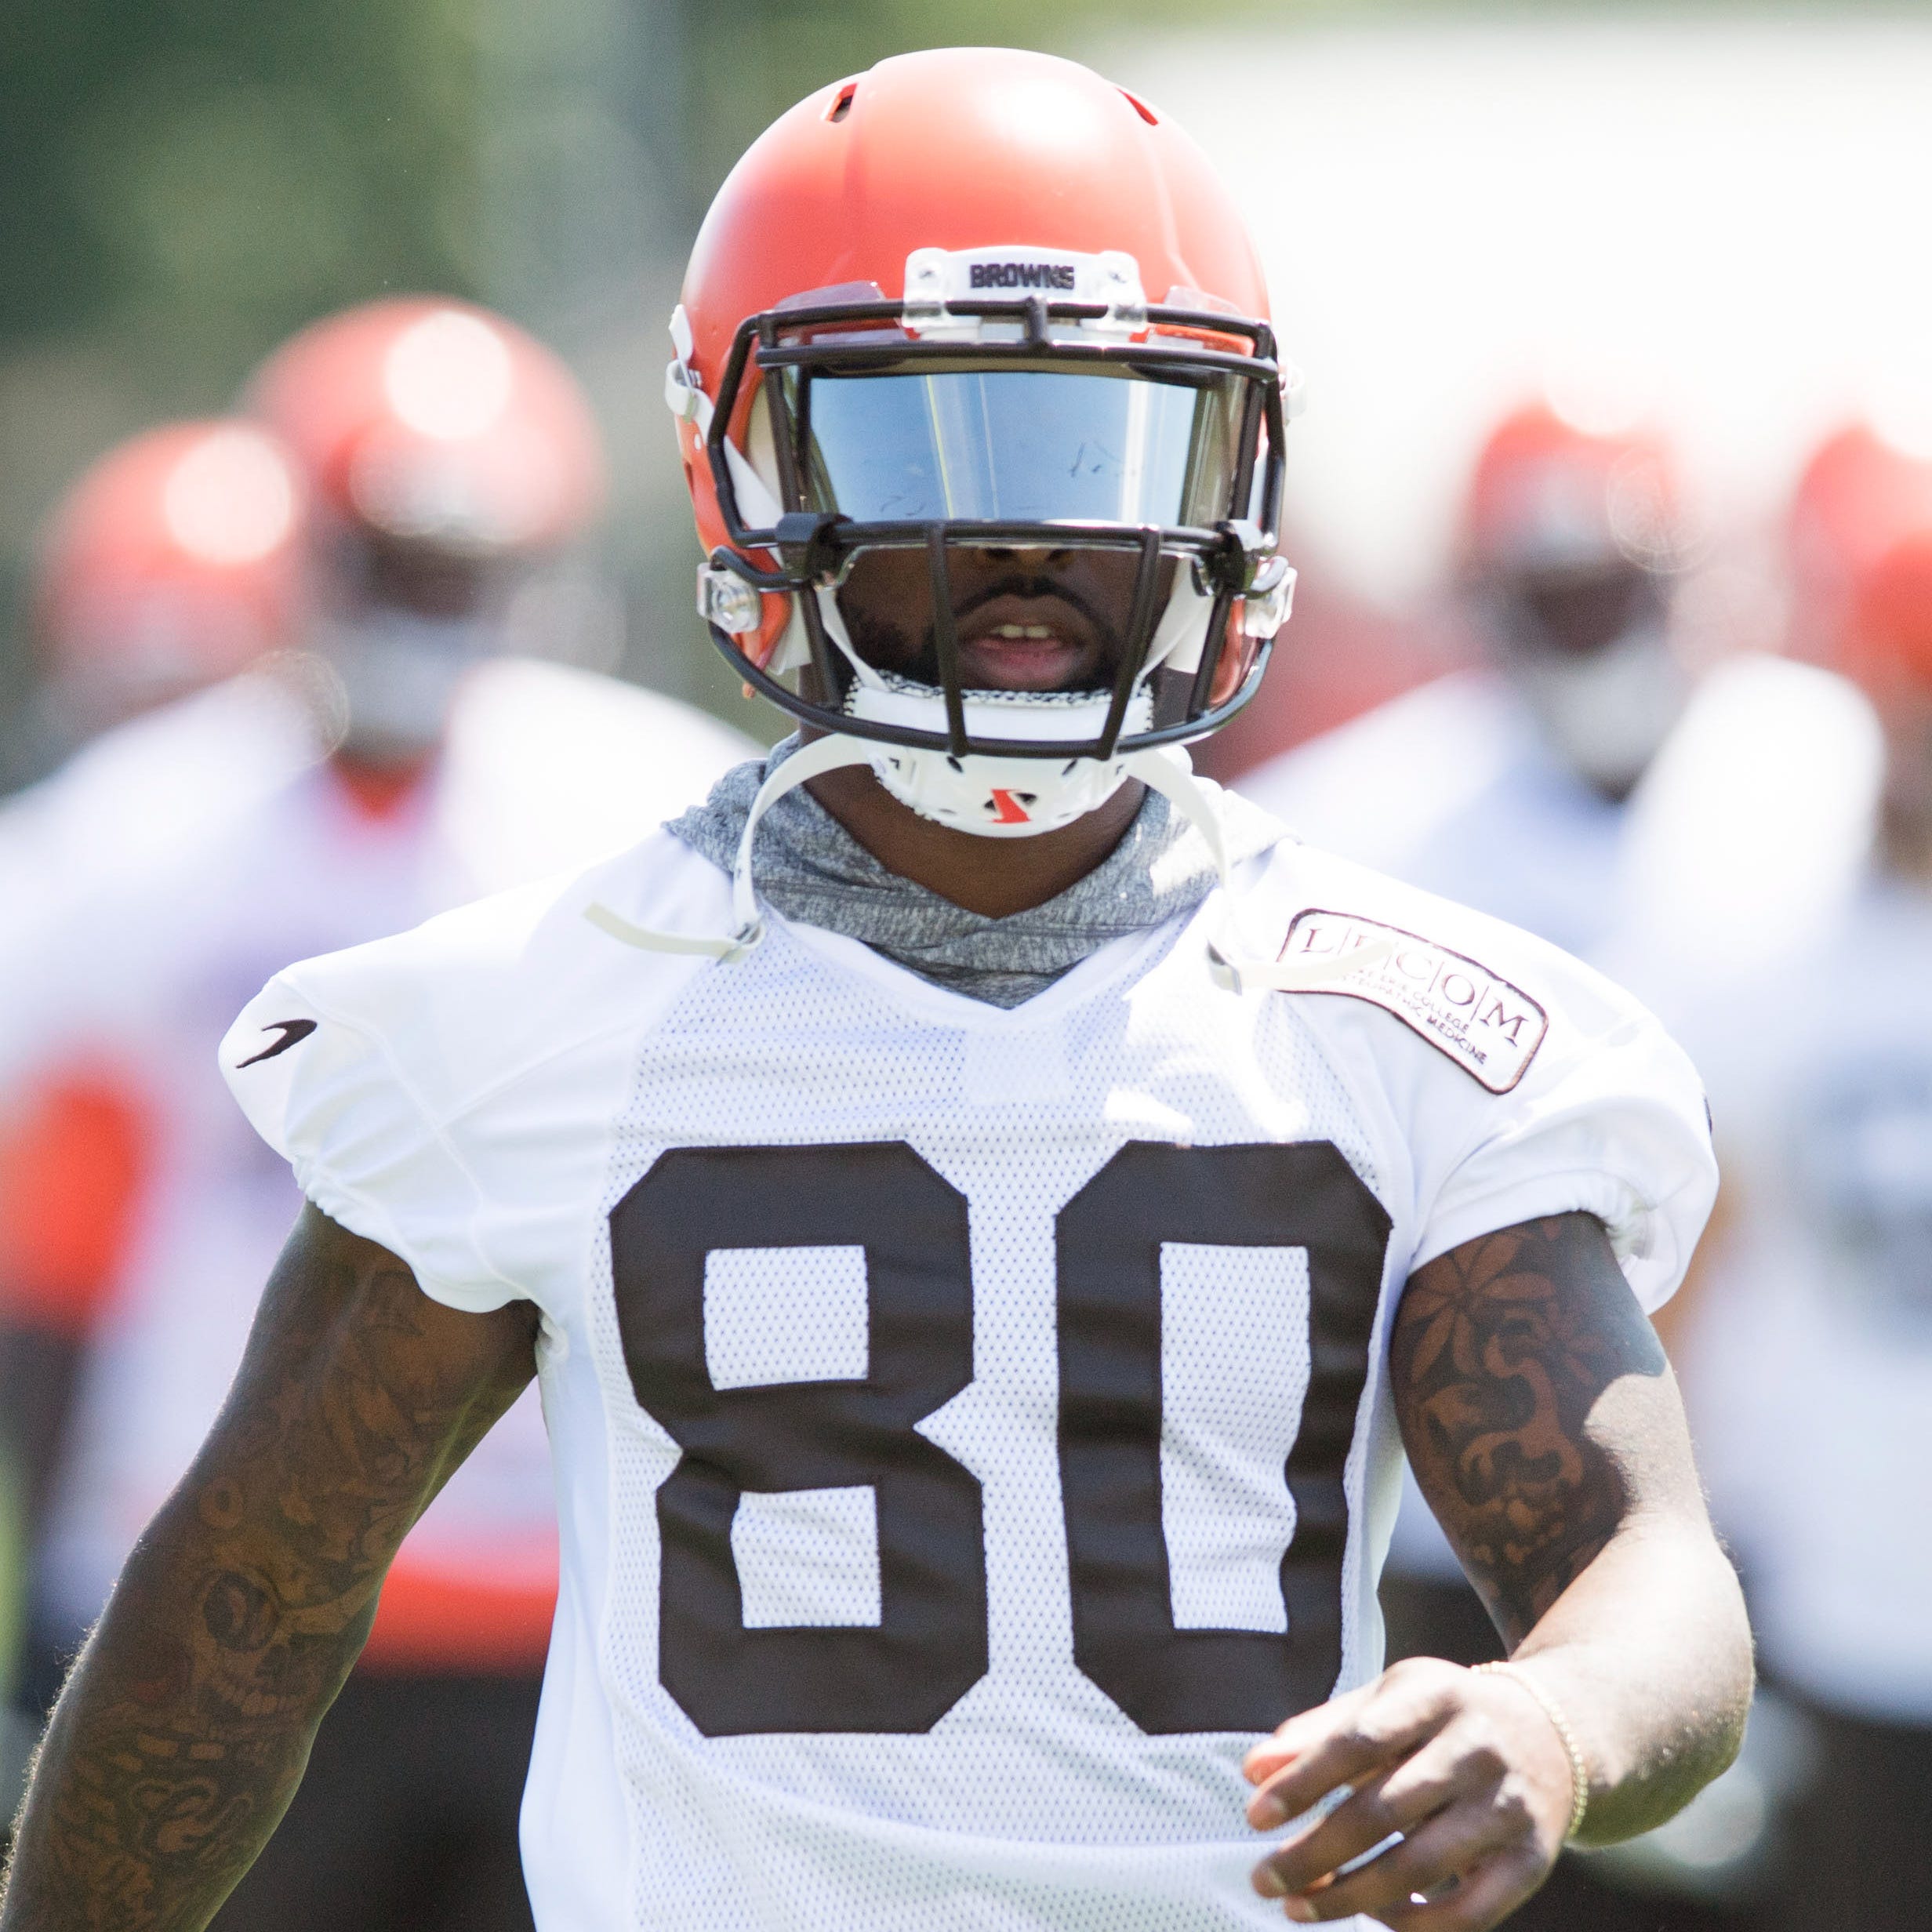 Jarvis Landry is in his first season with the Browns.